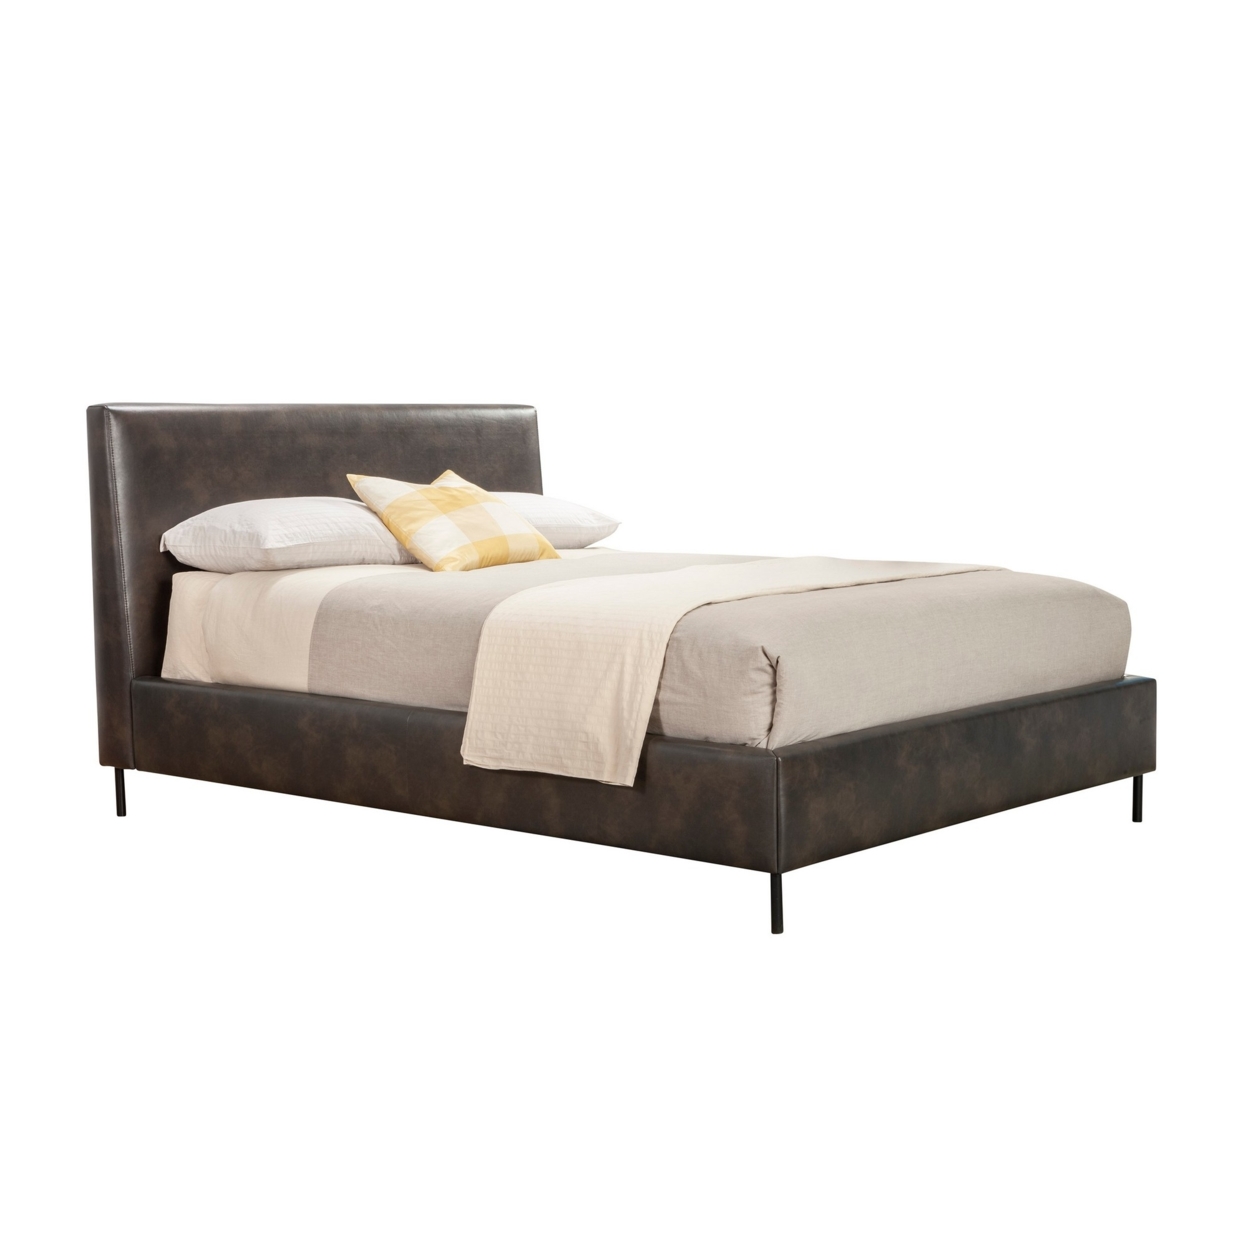 Faux Leather Upholstered Queen Bed With Metal Legs, Gray- Saltoro Sherpi